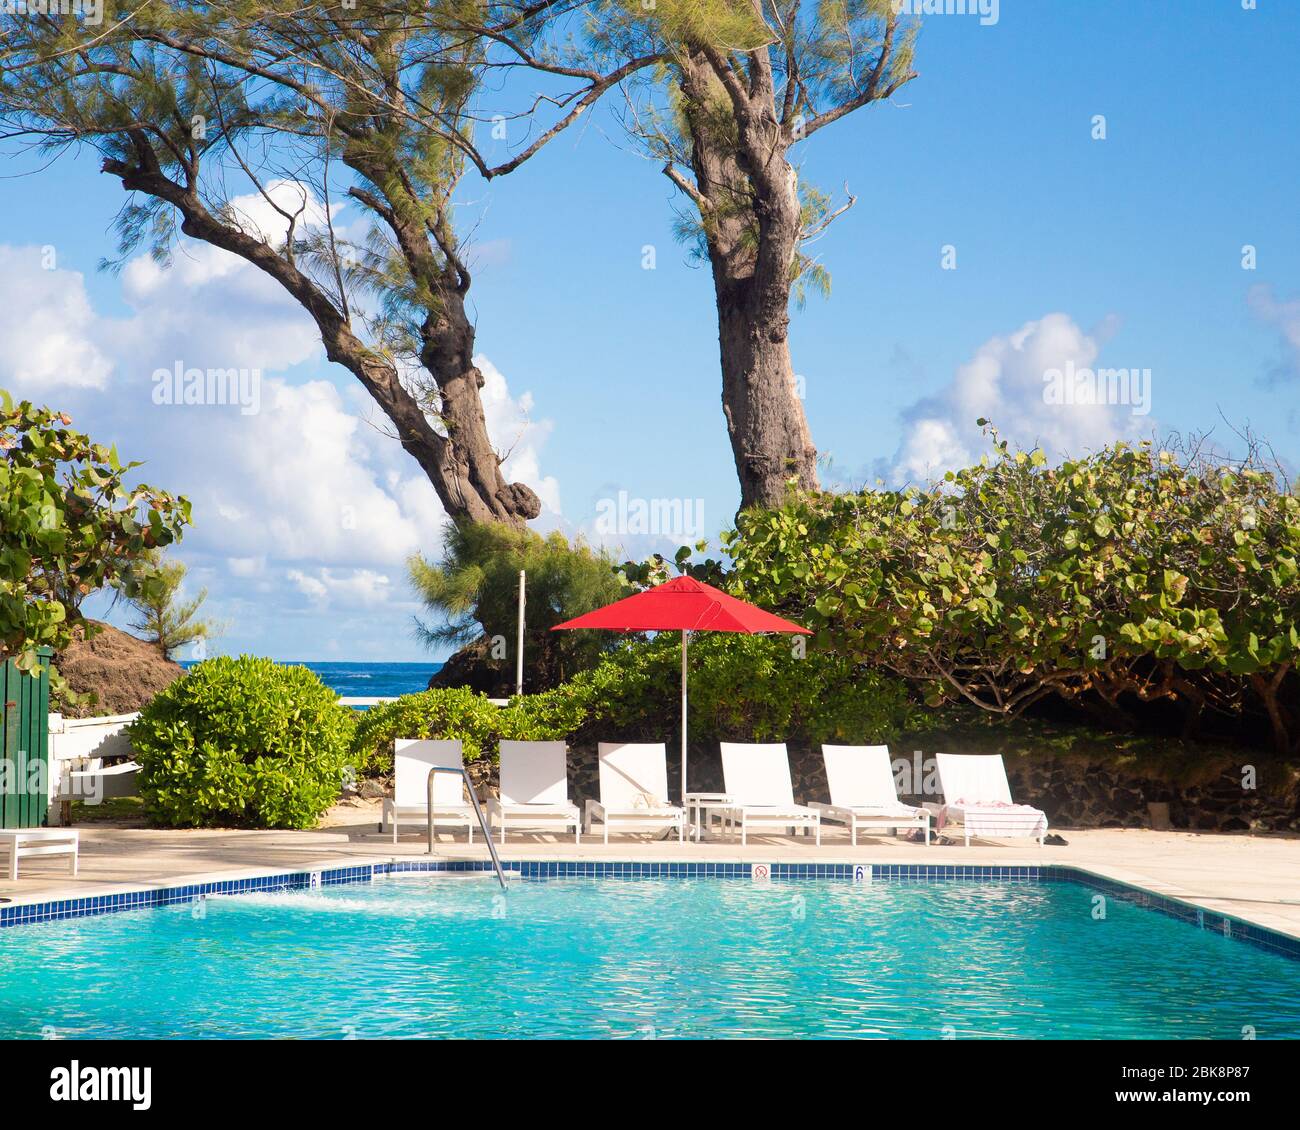 Lounge chairs and umbrella along swimming Pool Stock Photo